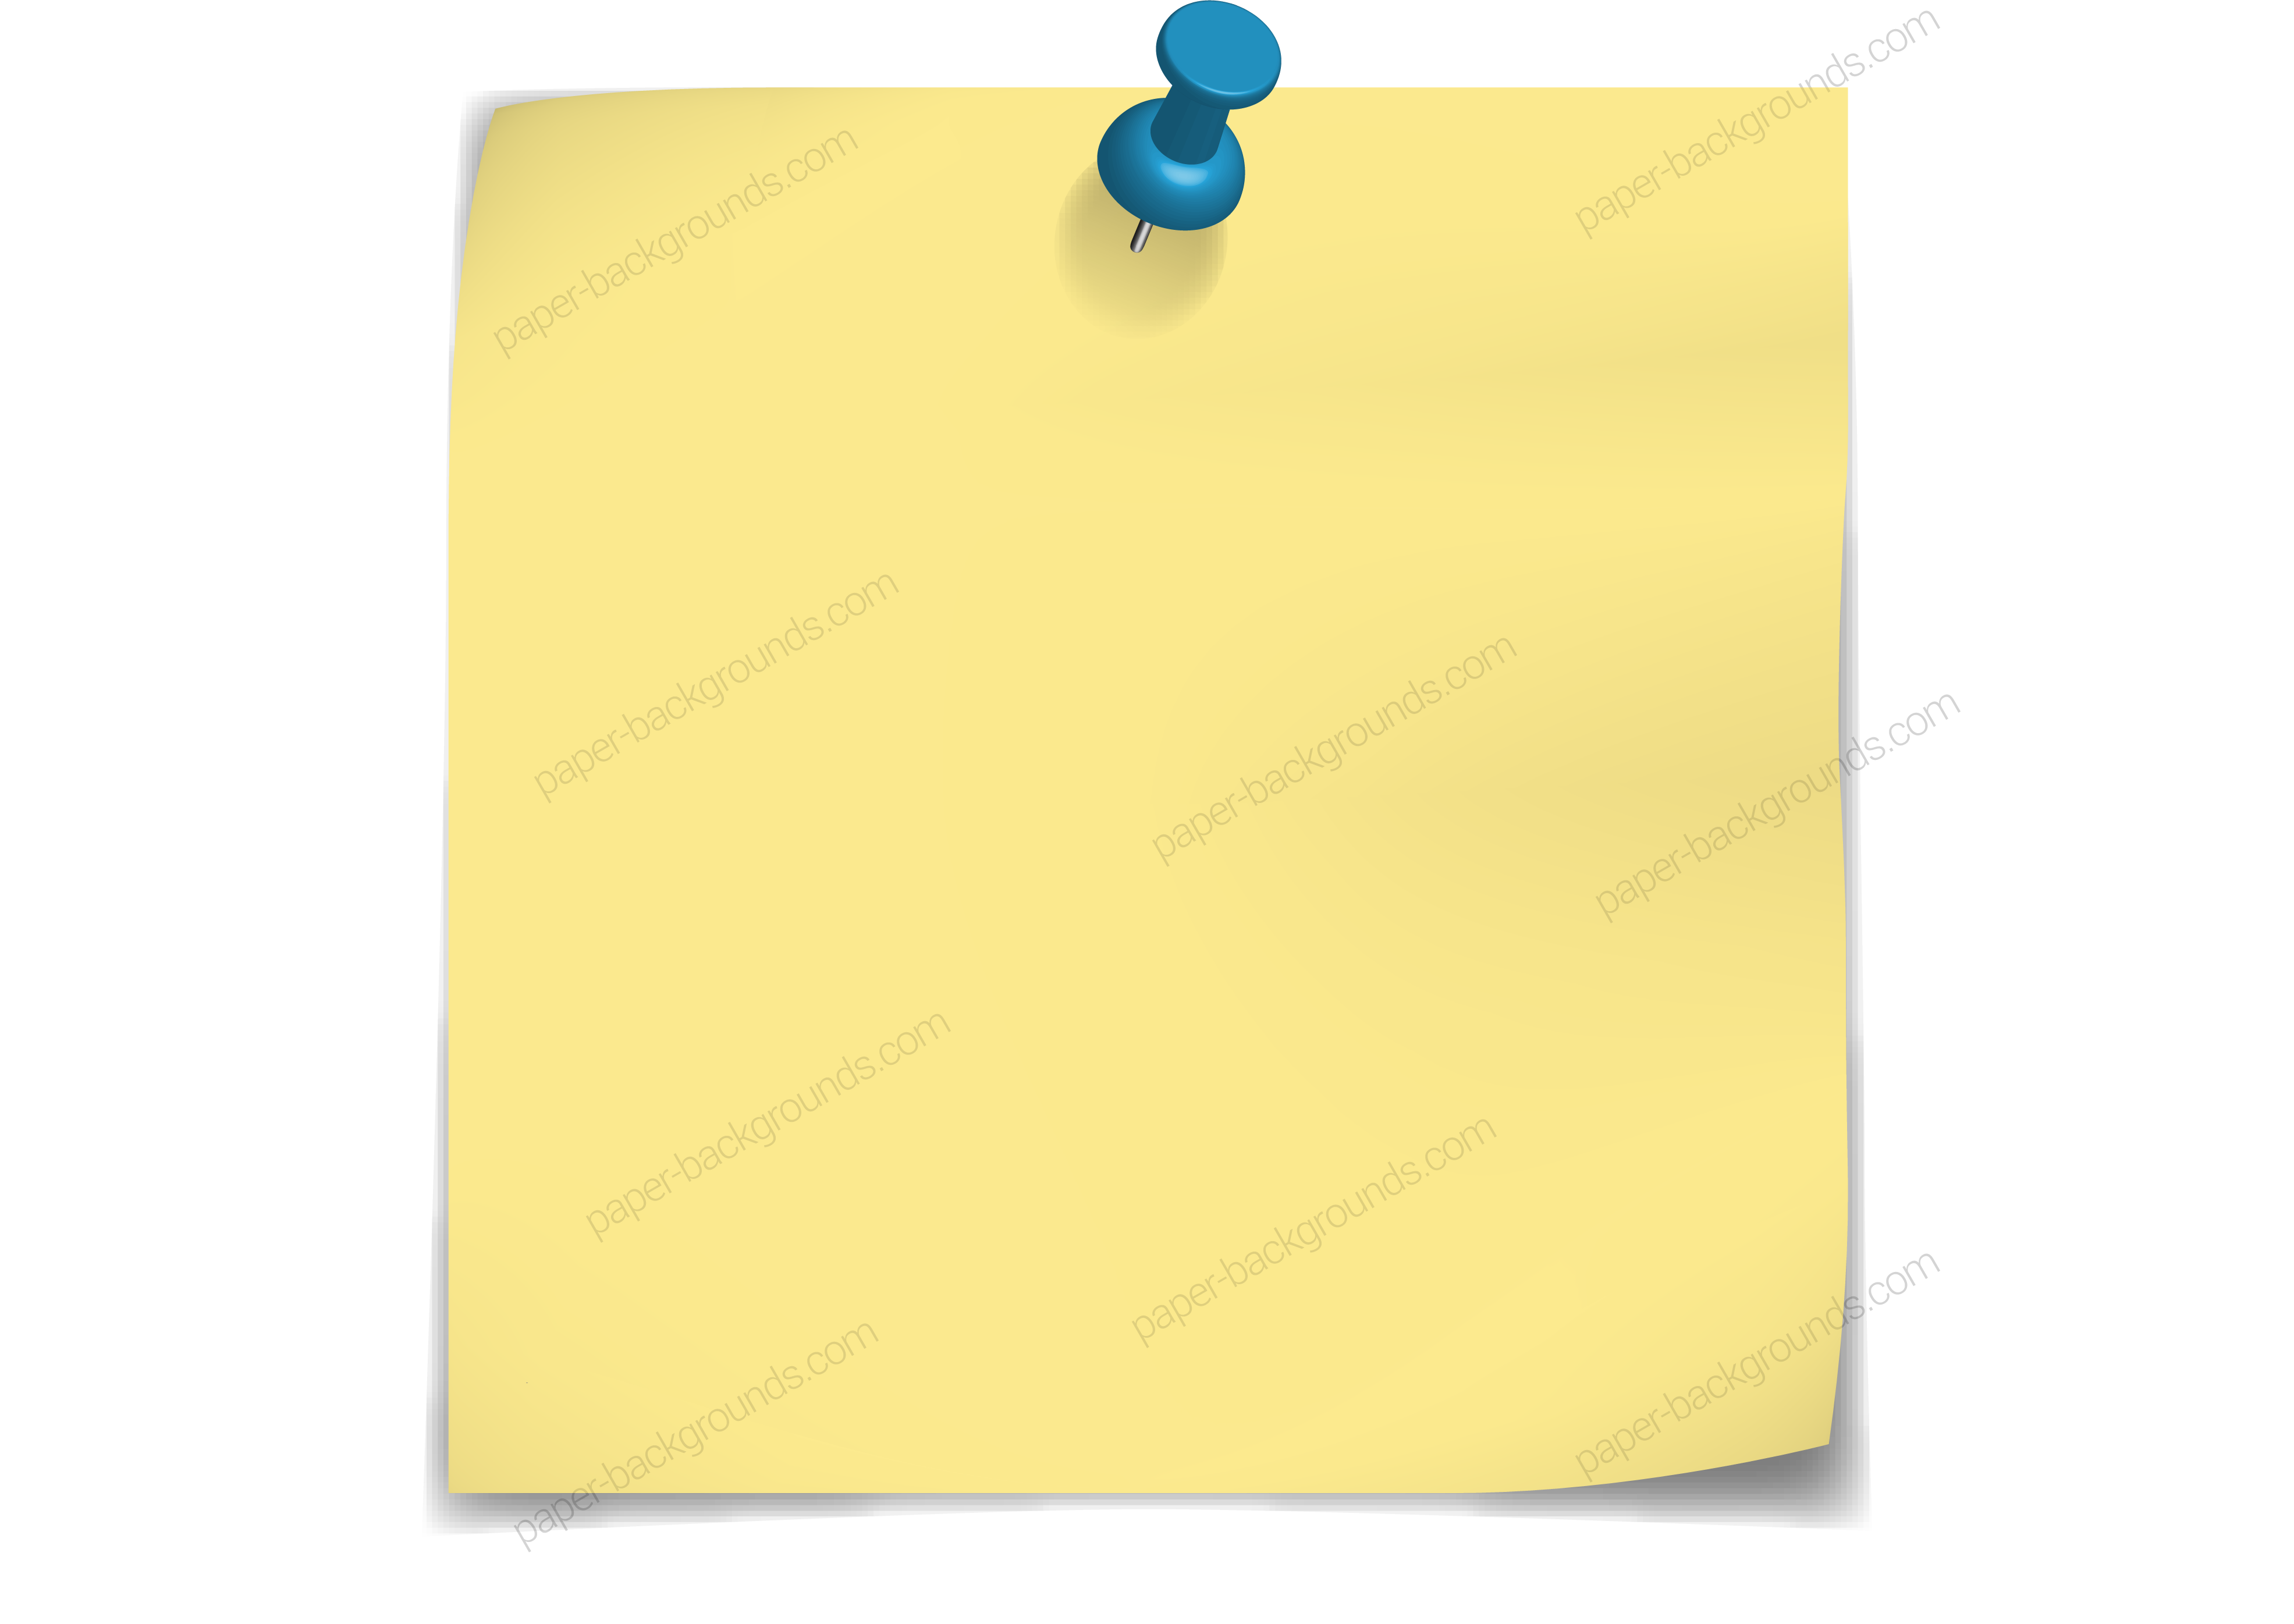 Post It Note With Blue Push Pin High Resolution 3492 X 2791 Clipart